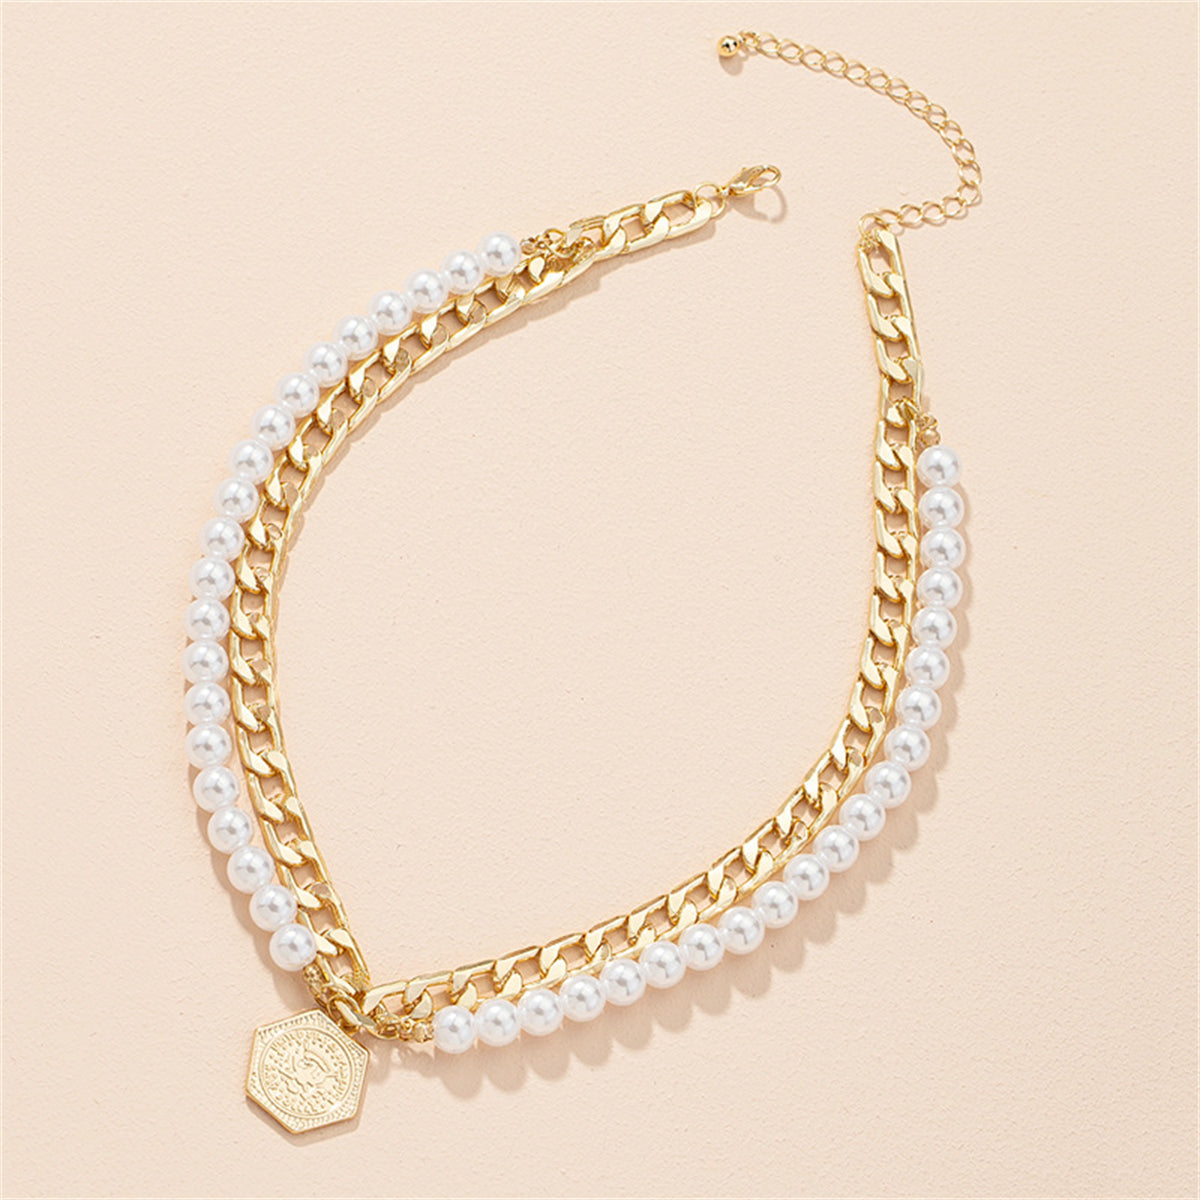 Pearl & 18K Gold-Plated Coin Layered Pendant Necklace